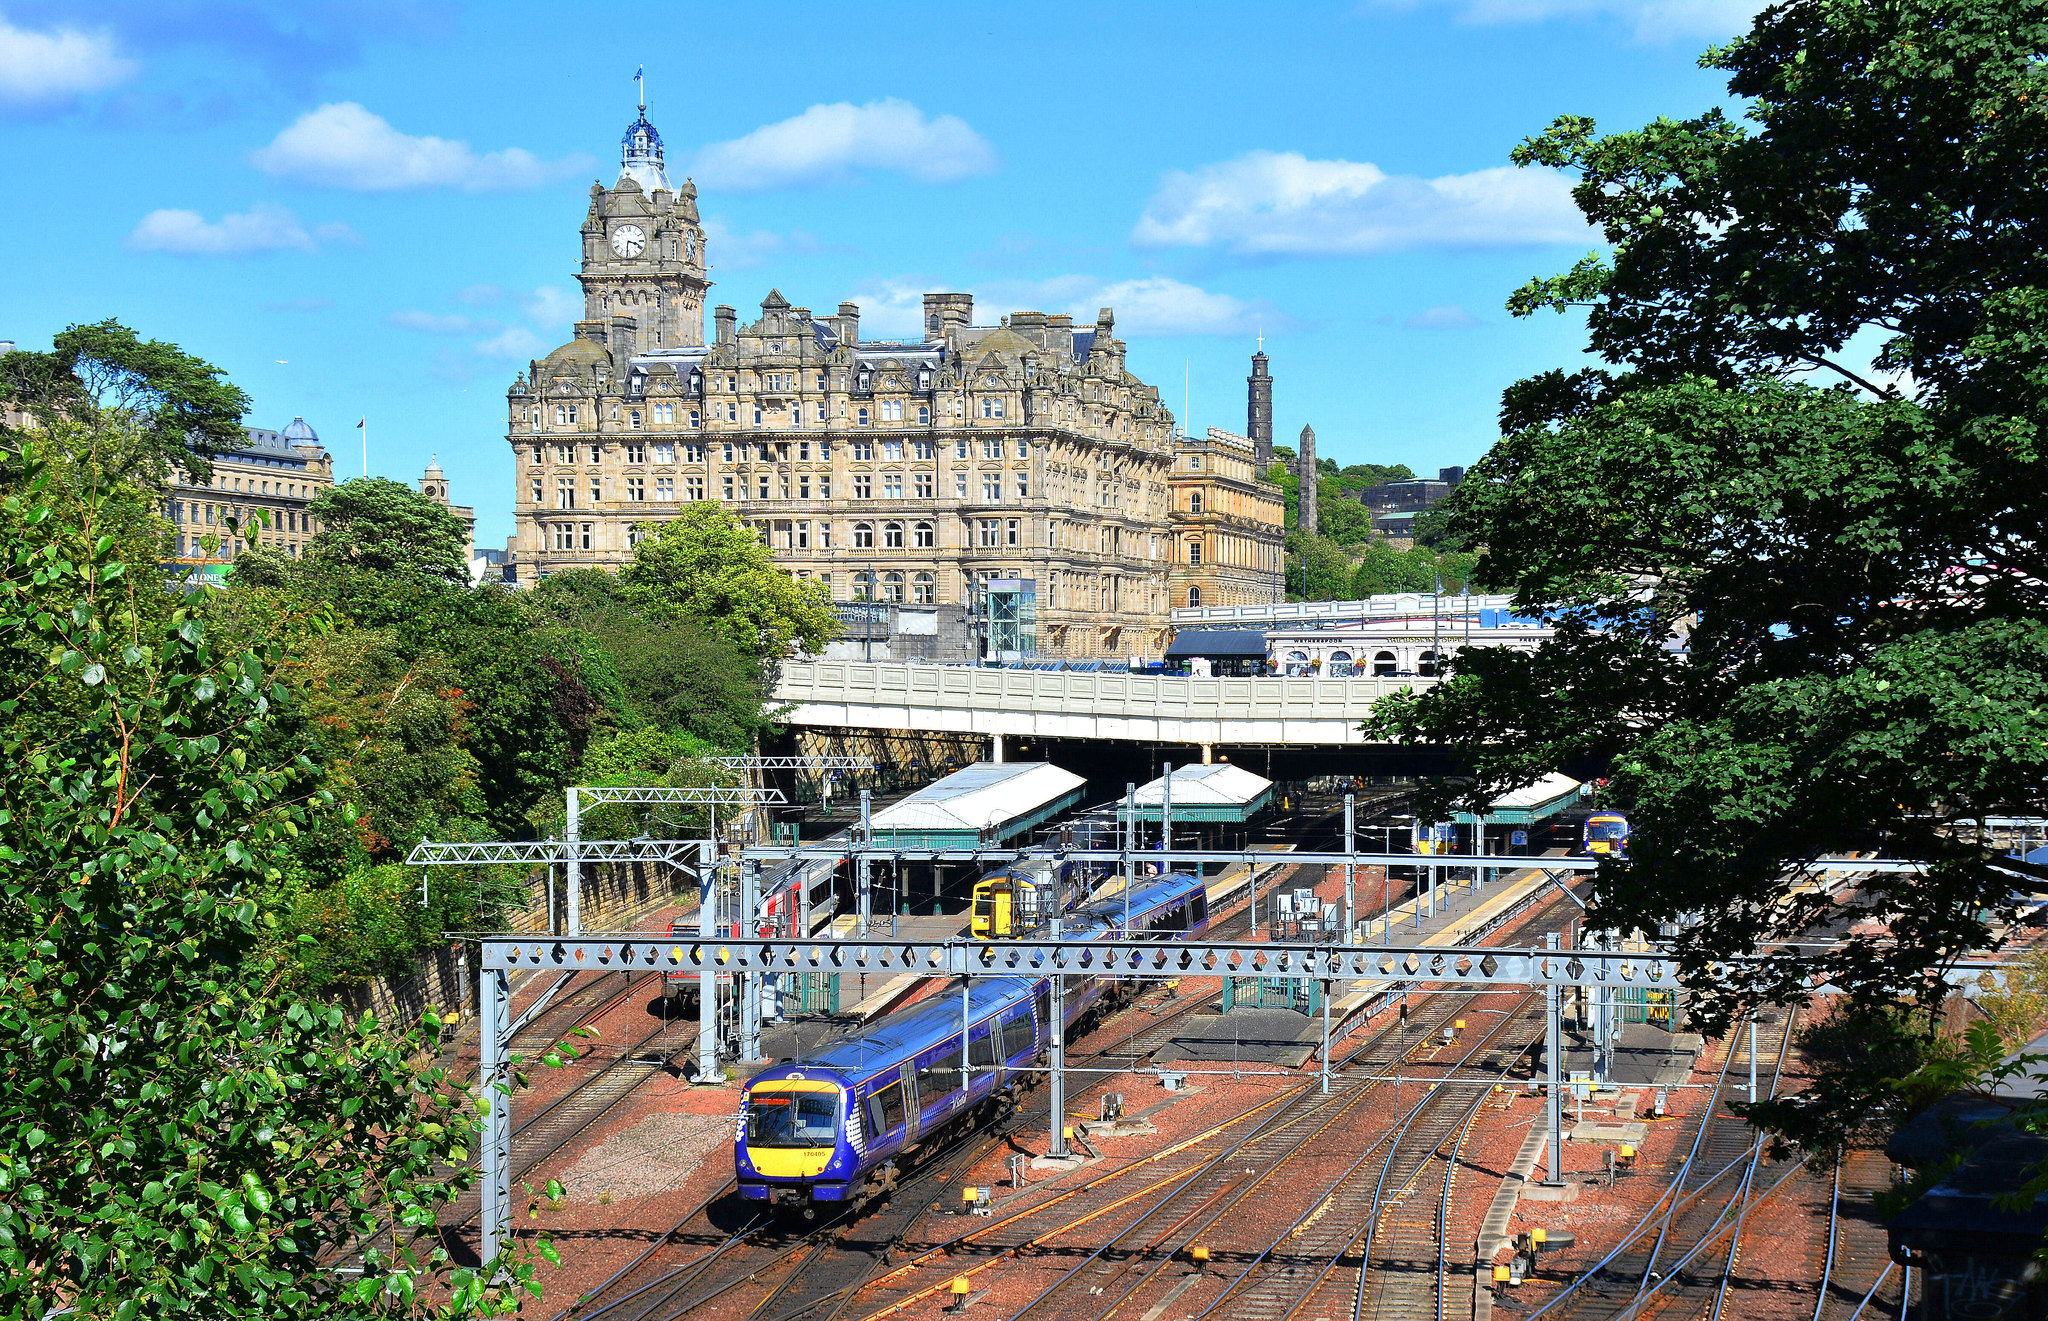 A view of Waverley Train Station from Princes Street gardens. A train can be seen leaving the station. Also in view is the Balmoral hotel on North Bridge.